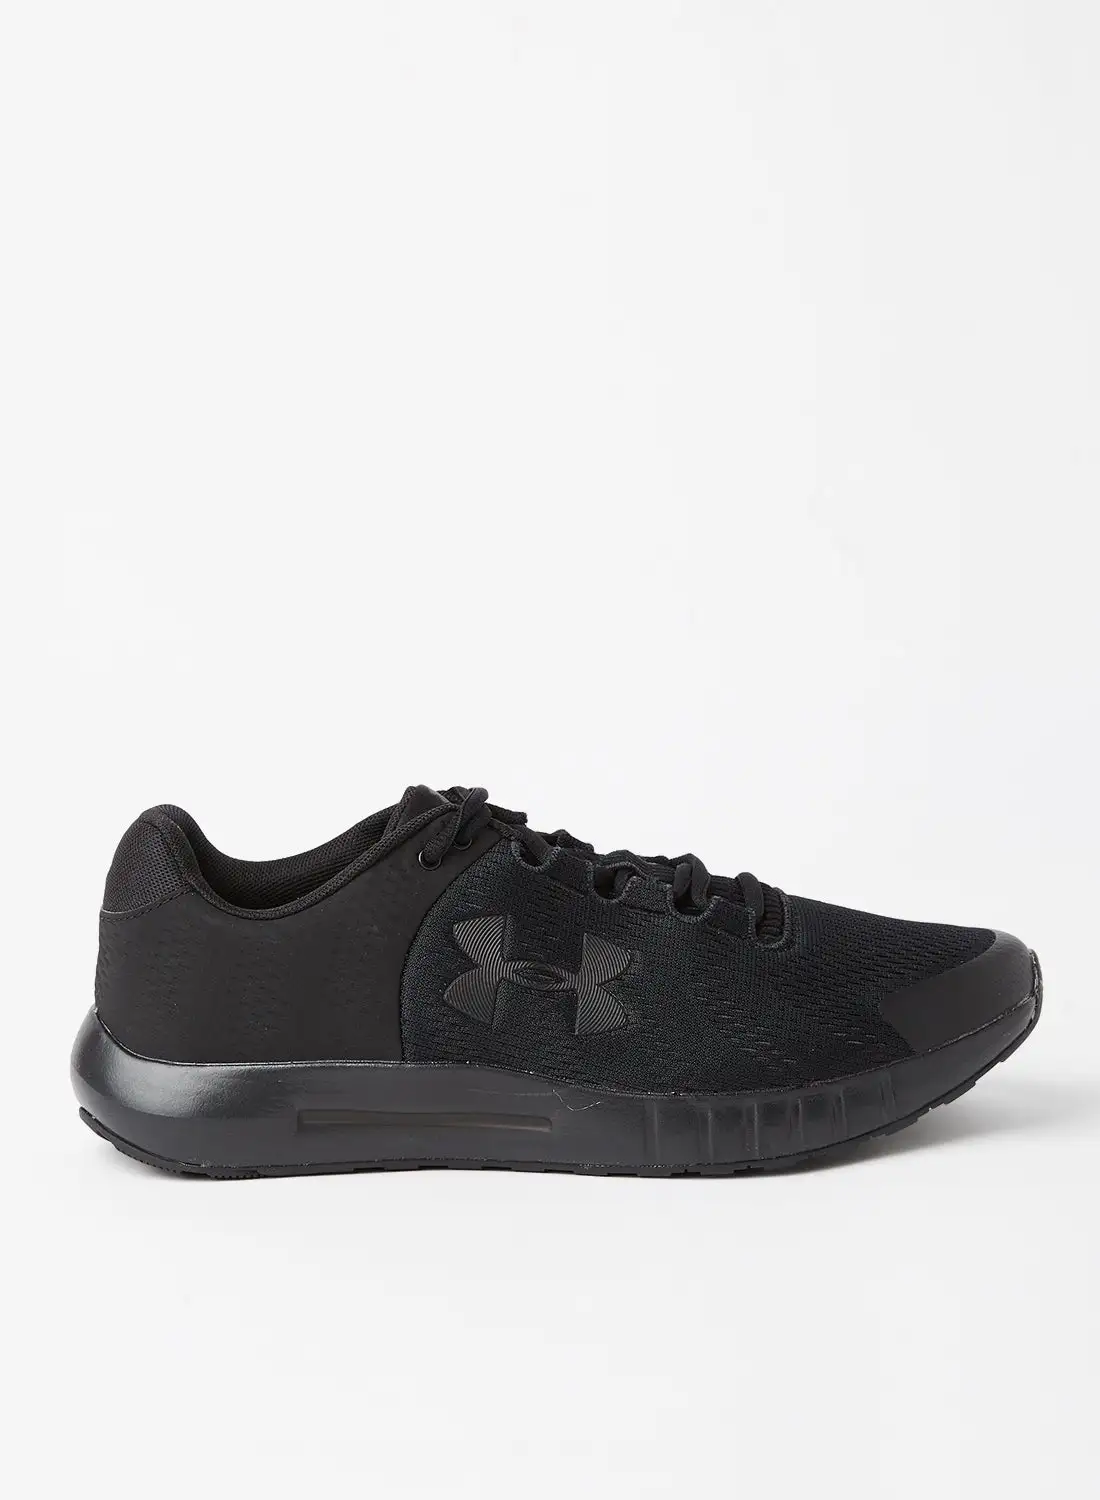 UNDER ARMOUR Micro G Pursuit BP Running Shoes Black